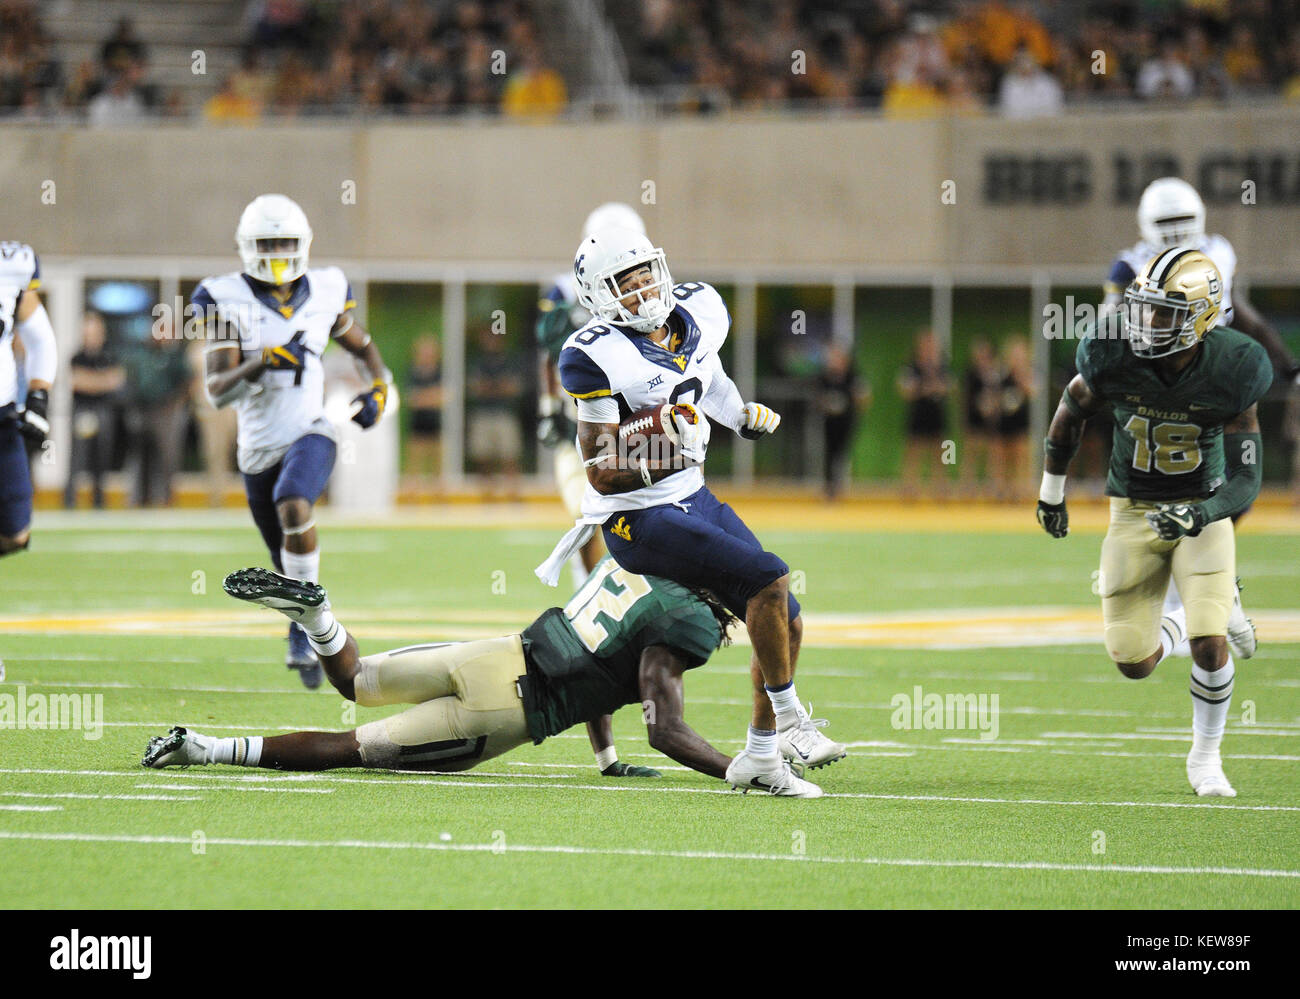 Waco, Texas, USA. 21st Oct, 2017. West Virginia Mountaineers wide receiver Marcus Simms (8) spins out of tack away from Baylor Bears safety Davion Hall (12) during the NCAA Football game between the Baylor Bears and West Virginia Mountaineers at McLane Stadium in Waco, Texas. Matthew Lynch/CSM/Alamy Live News Stock Photo